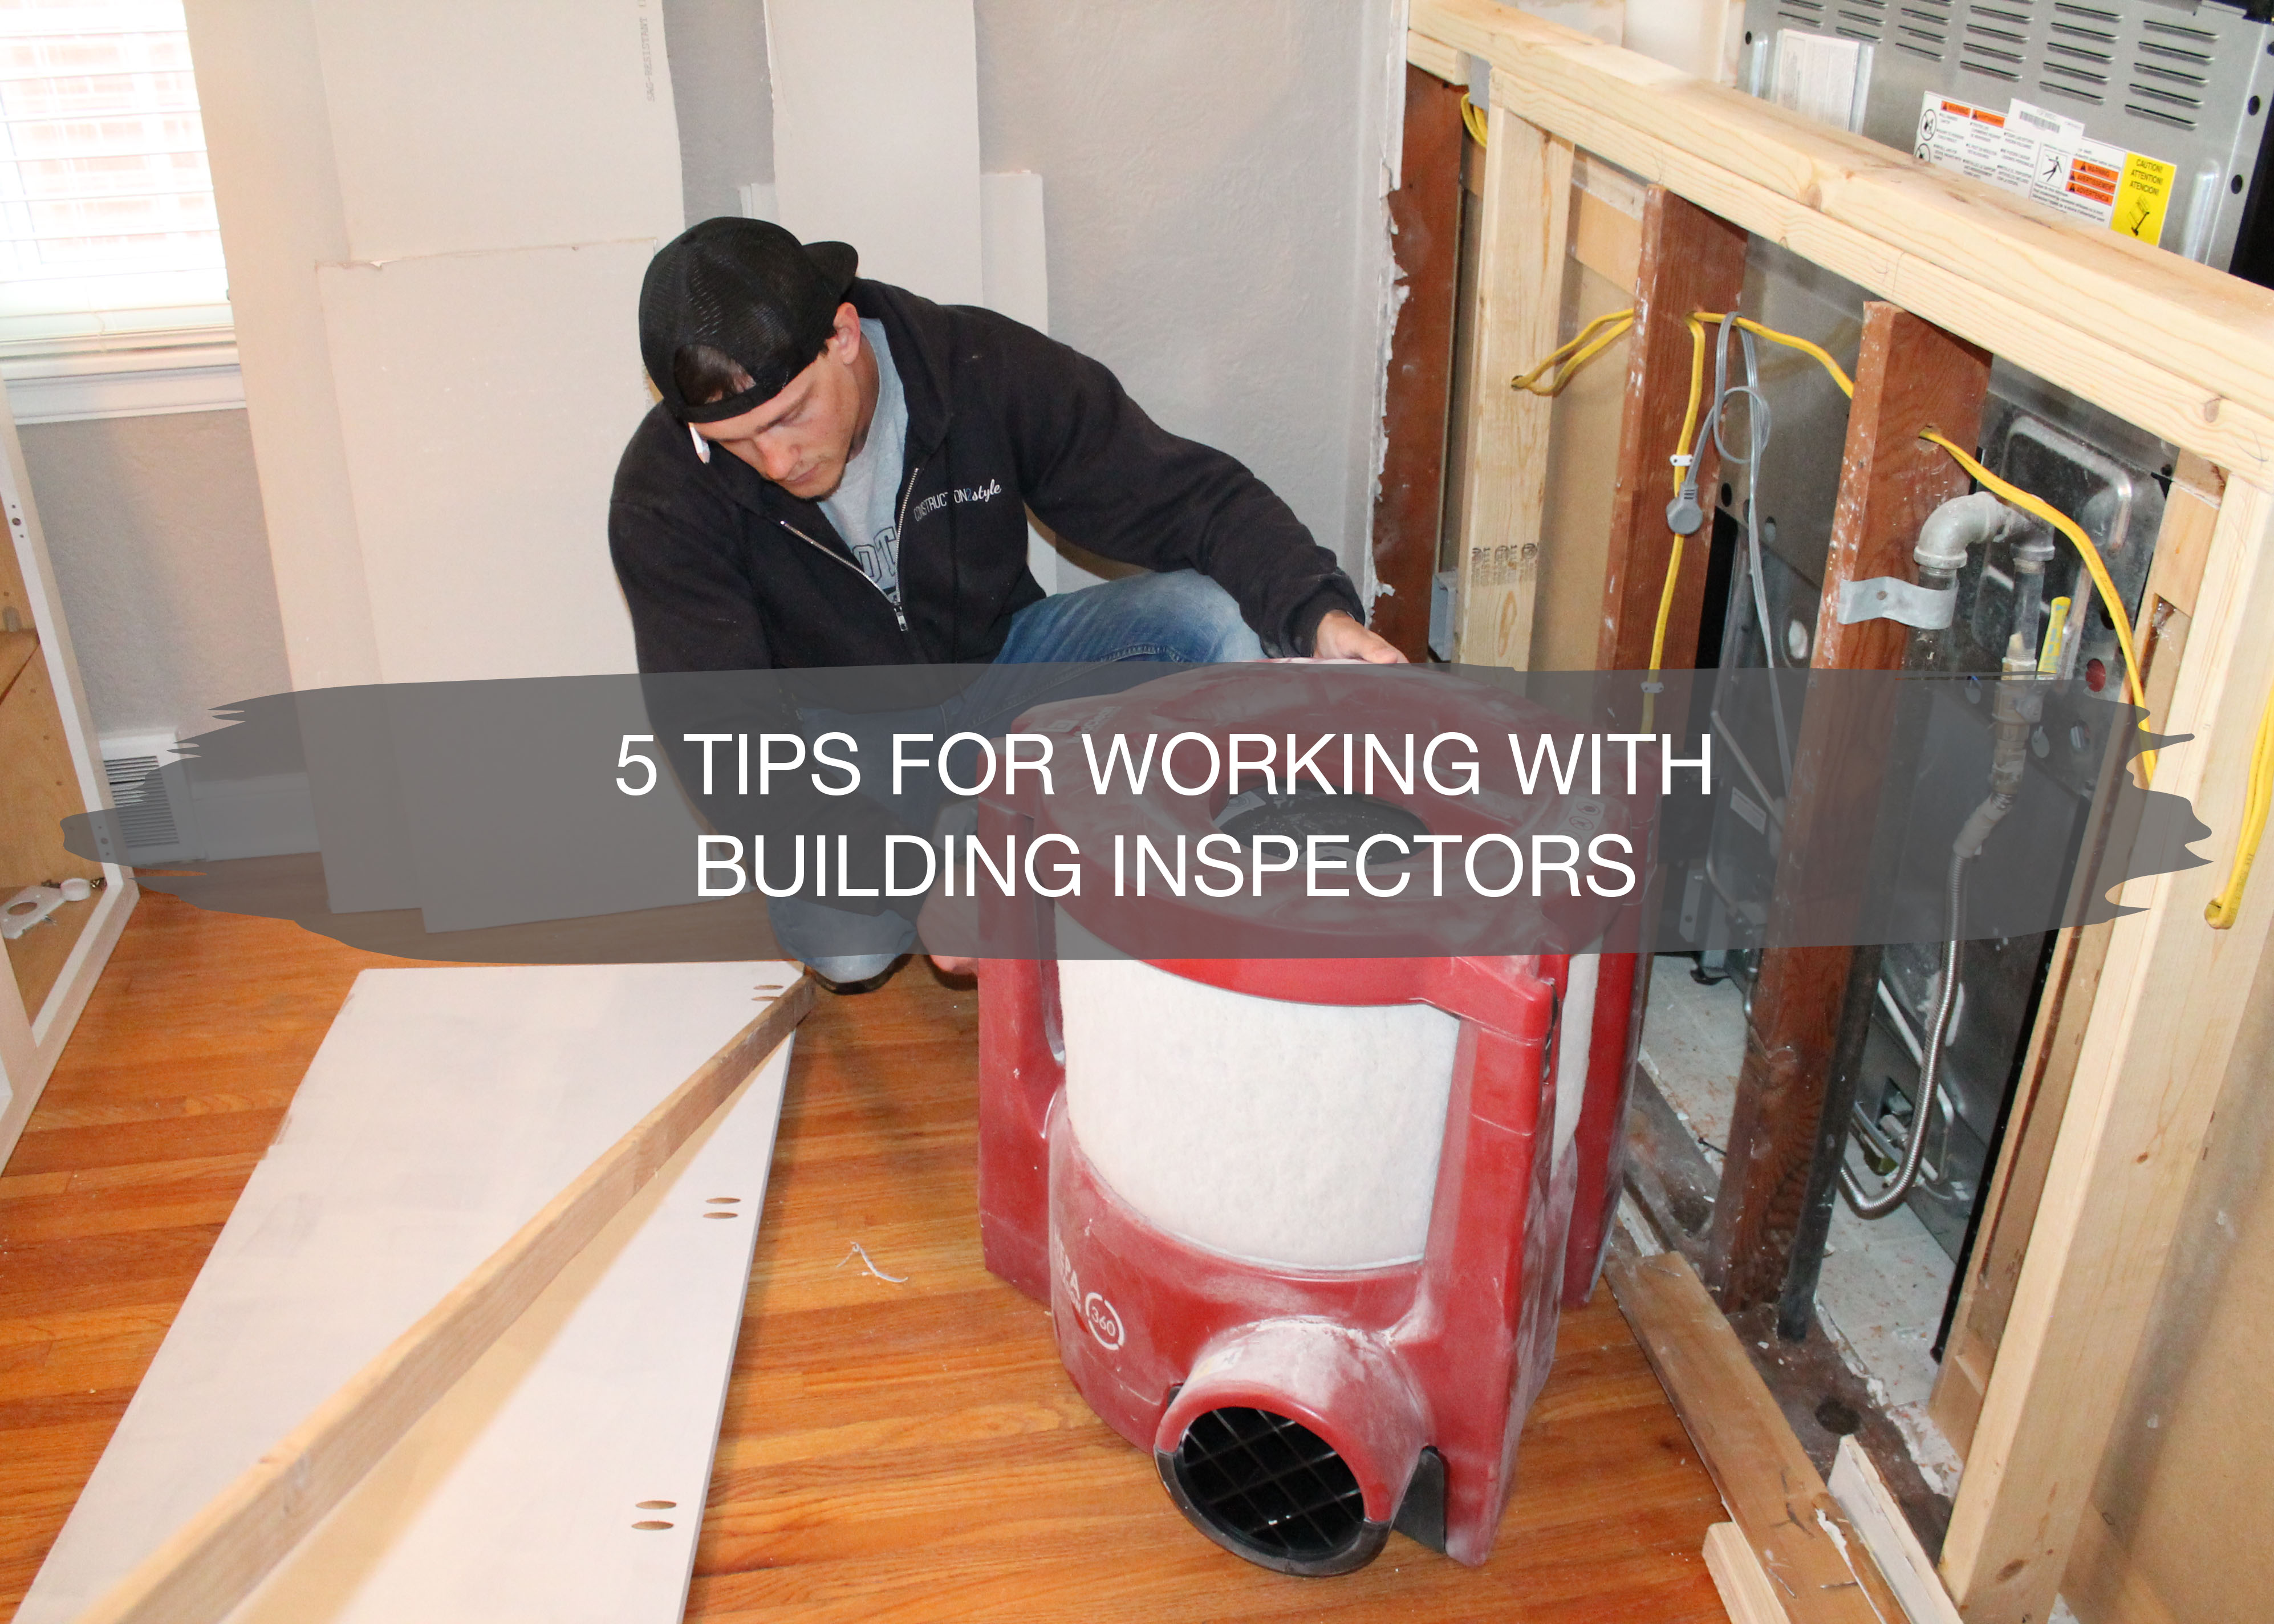 5 Tips for Working with Building Inspectors | construction2style